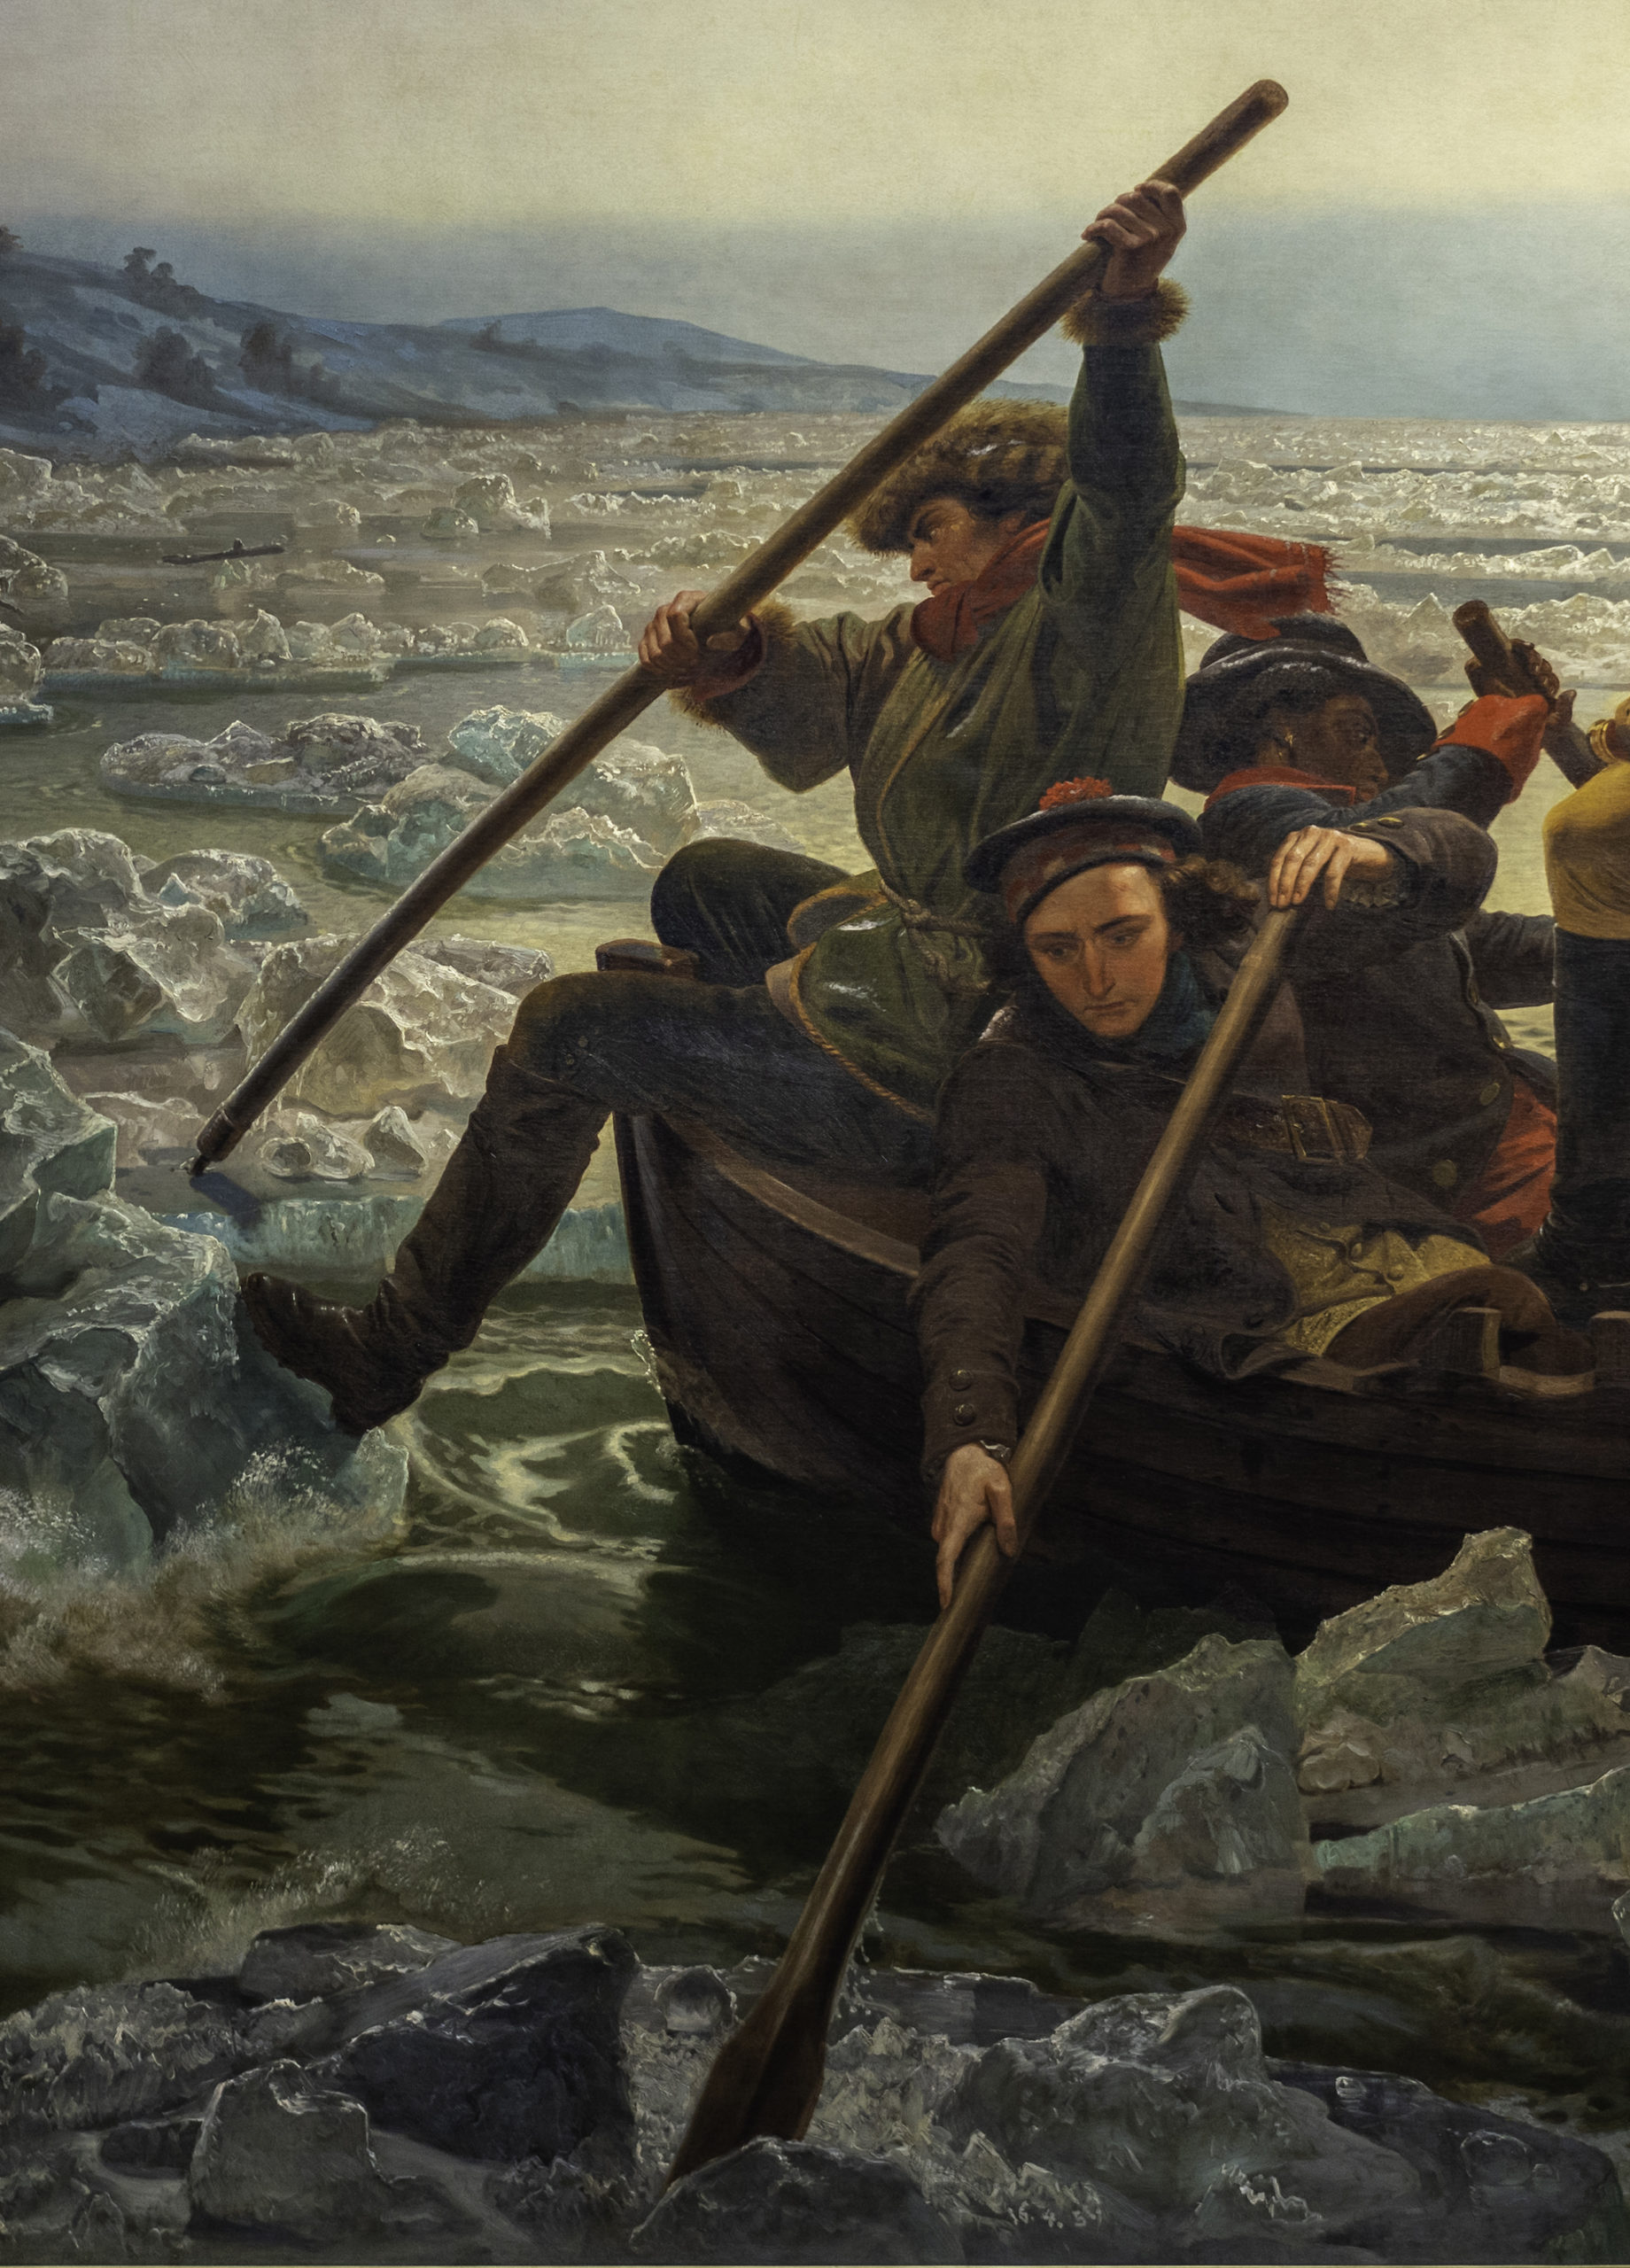 Rowers breaking up the ice as they cross the river on Christmas Day (detail), Emanuel Leutze, Washington Crossing the Delaware, 1851, oil on canvas, 378.5 x 647.7 cm (Metropolitan Museum of Art, photo: Steven Zucker, CC BY-NC-SA 2.0)